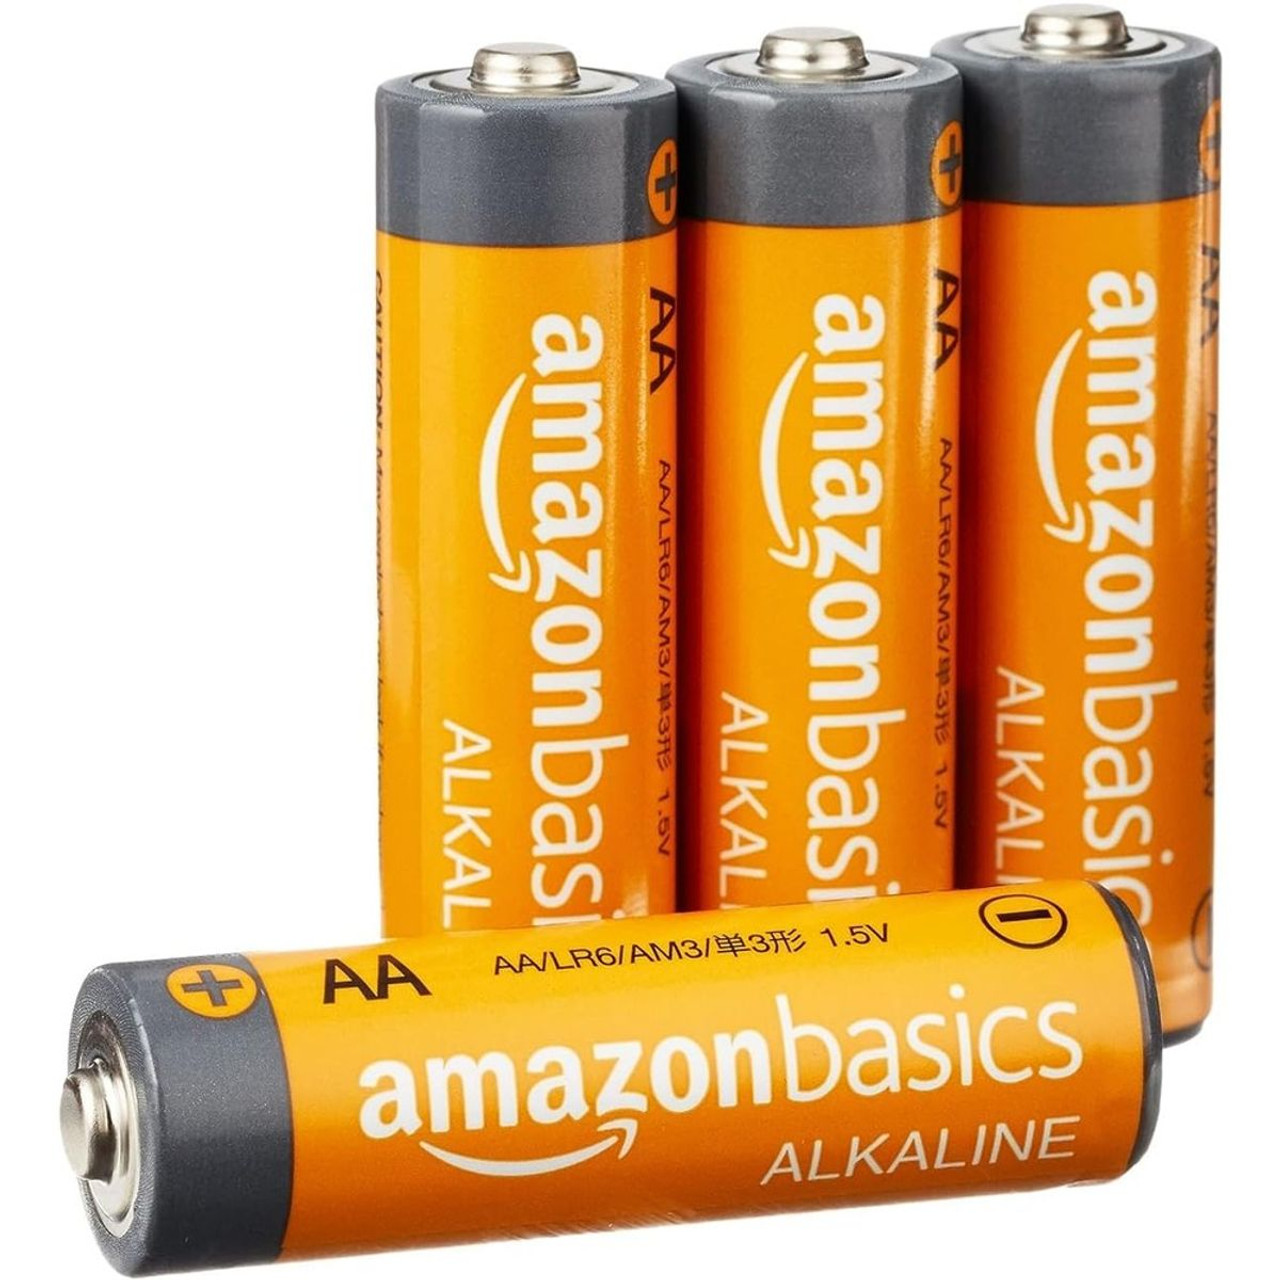 AA Alkaline Battery by Amazon Basics® (144-Pack) product image